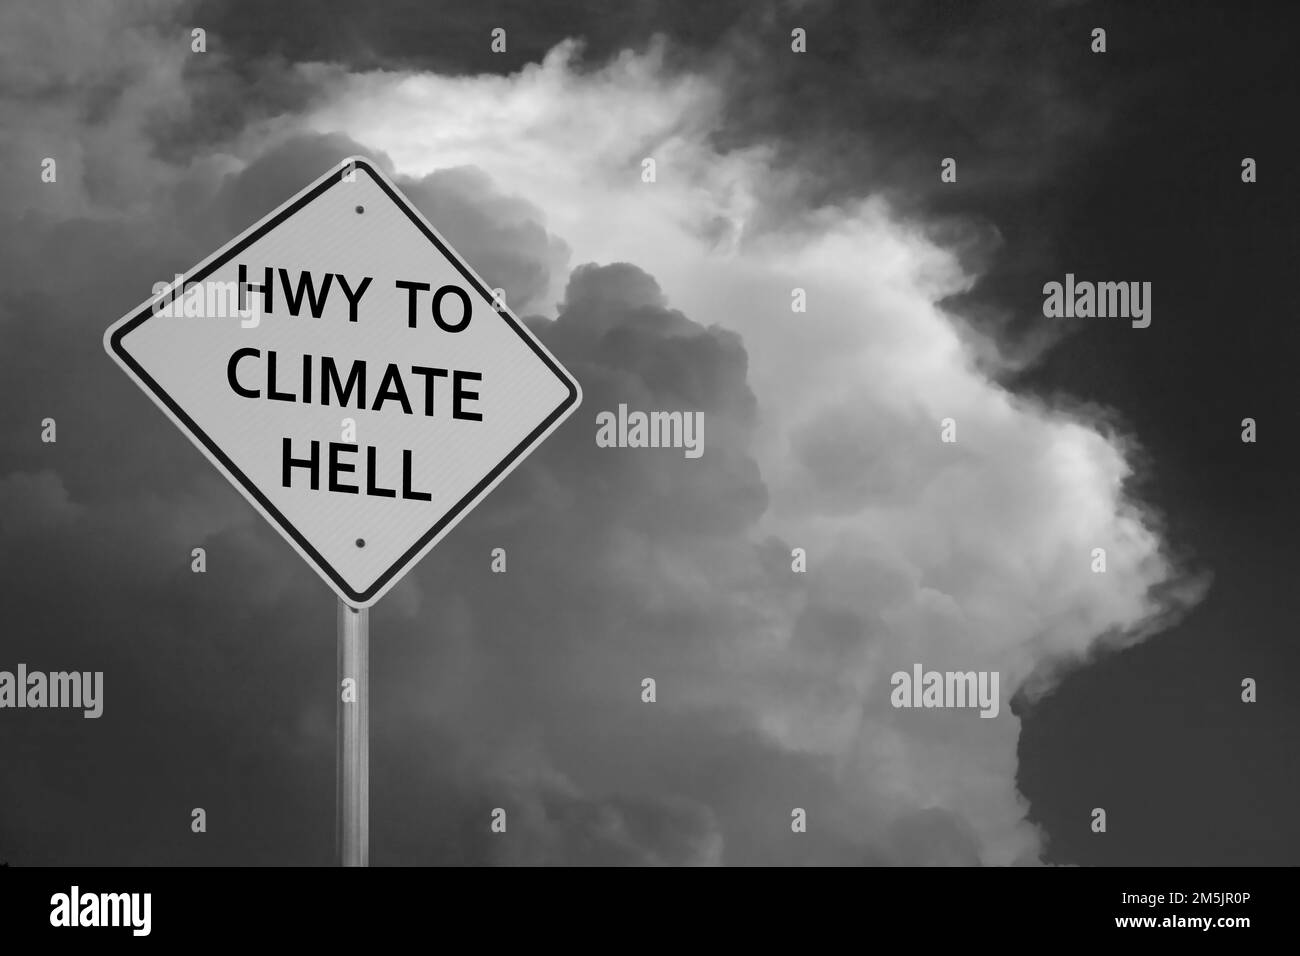 Highway To Climate Hell Stock Photo